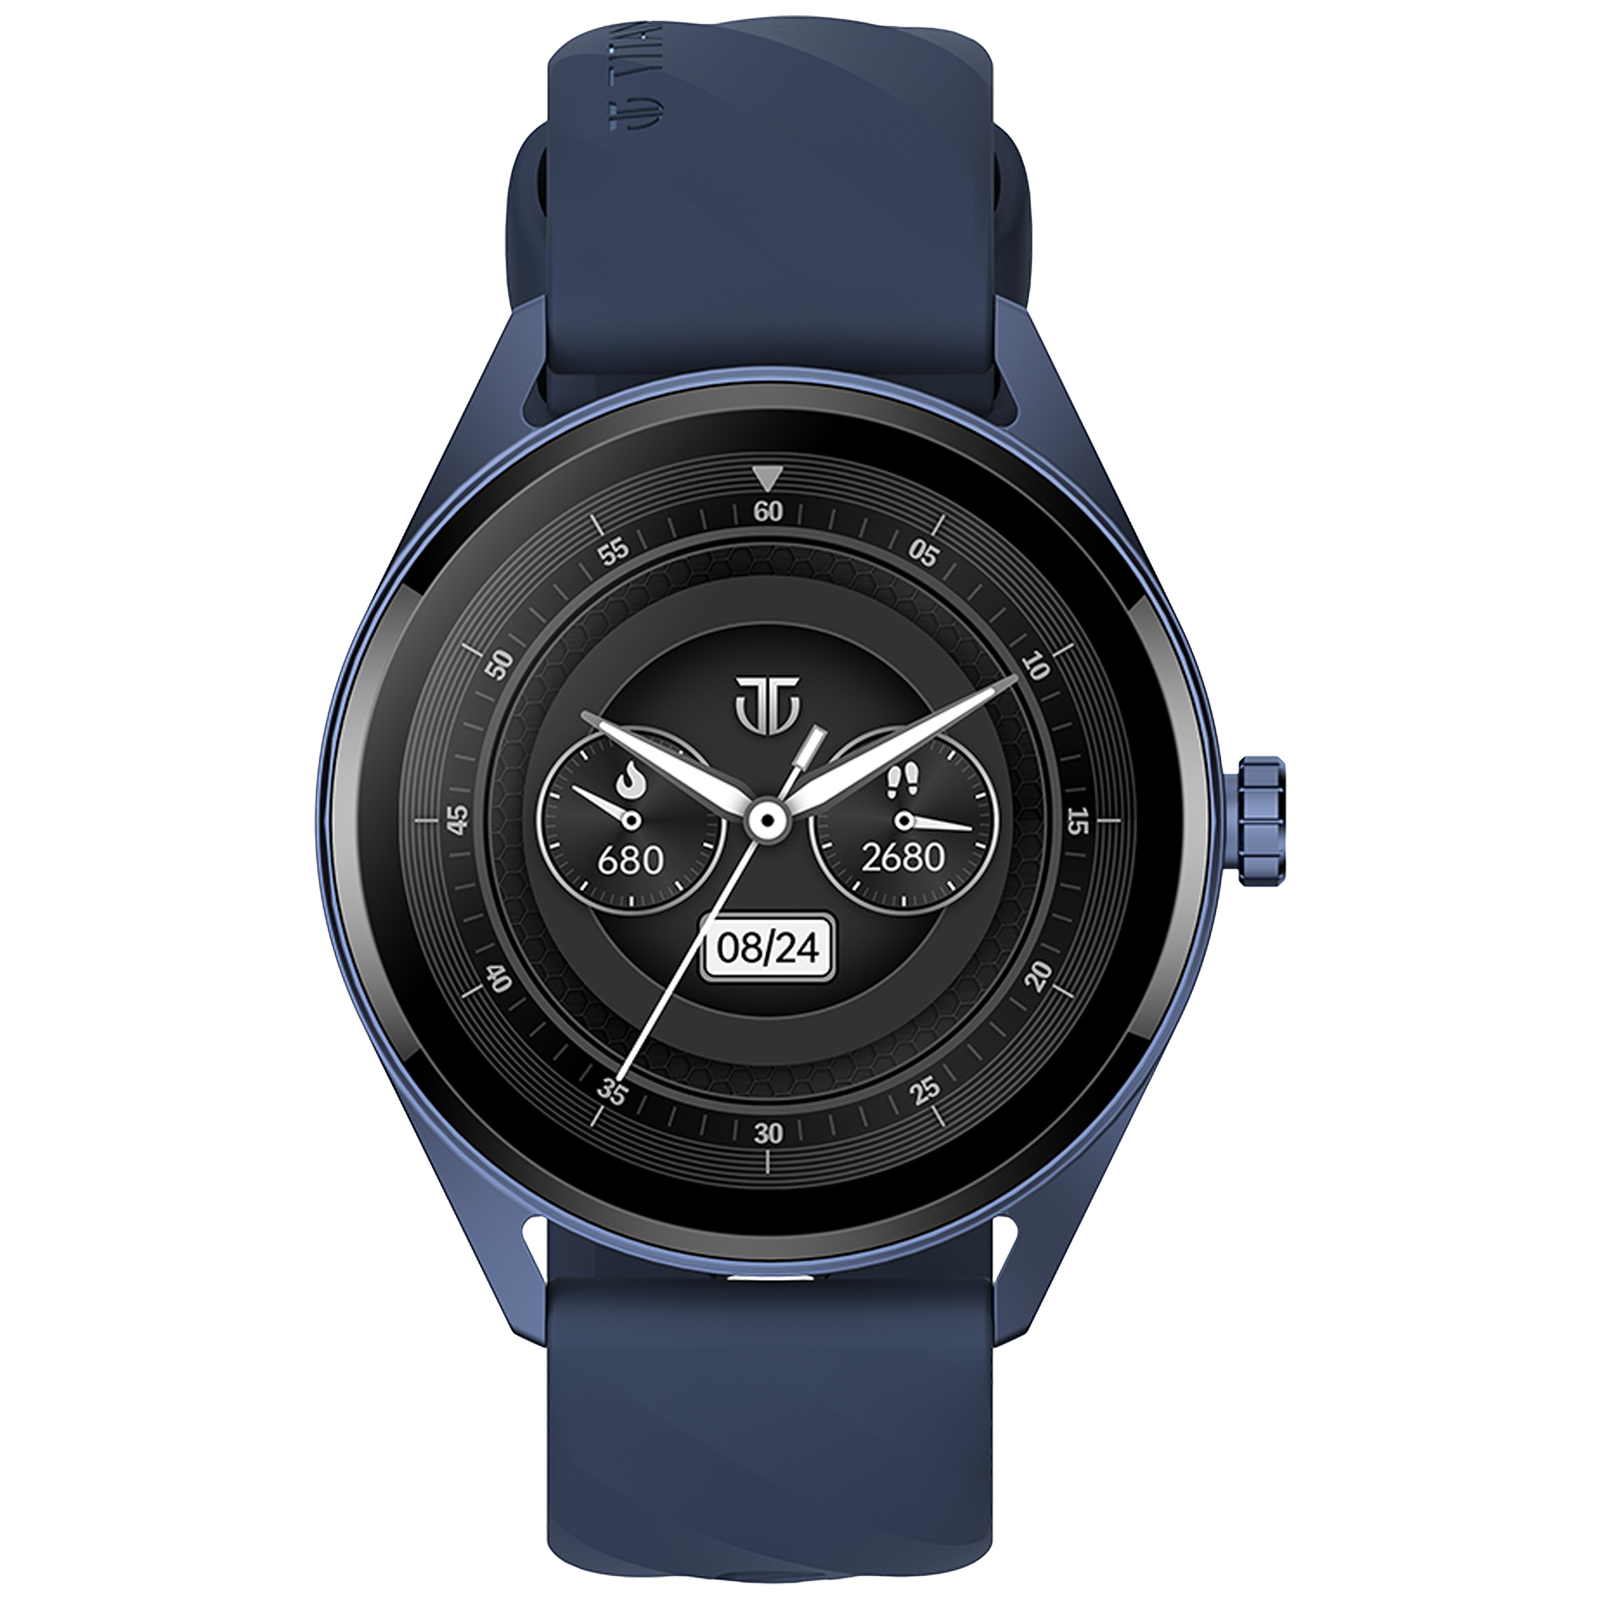 TITAN Crest Smartwatch with Bluetooth Calling (36.3mm AMOLED Display, IP68 Water Resistant, Blue Strap)